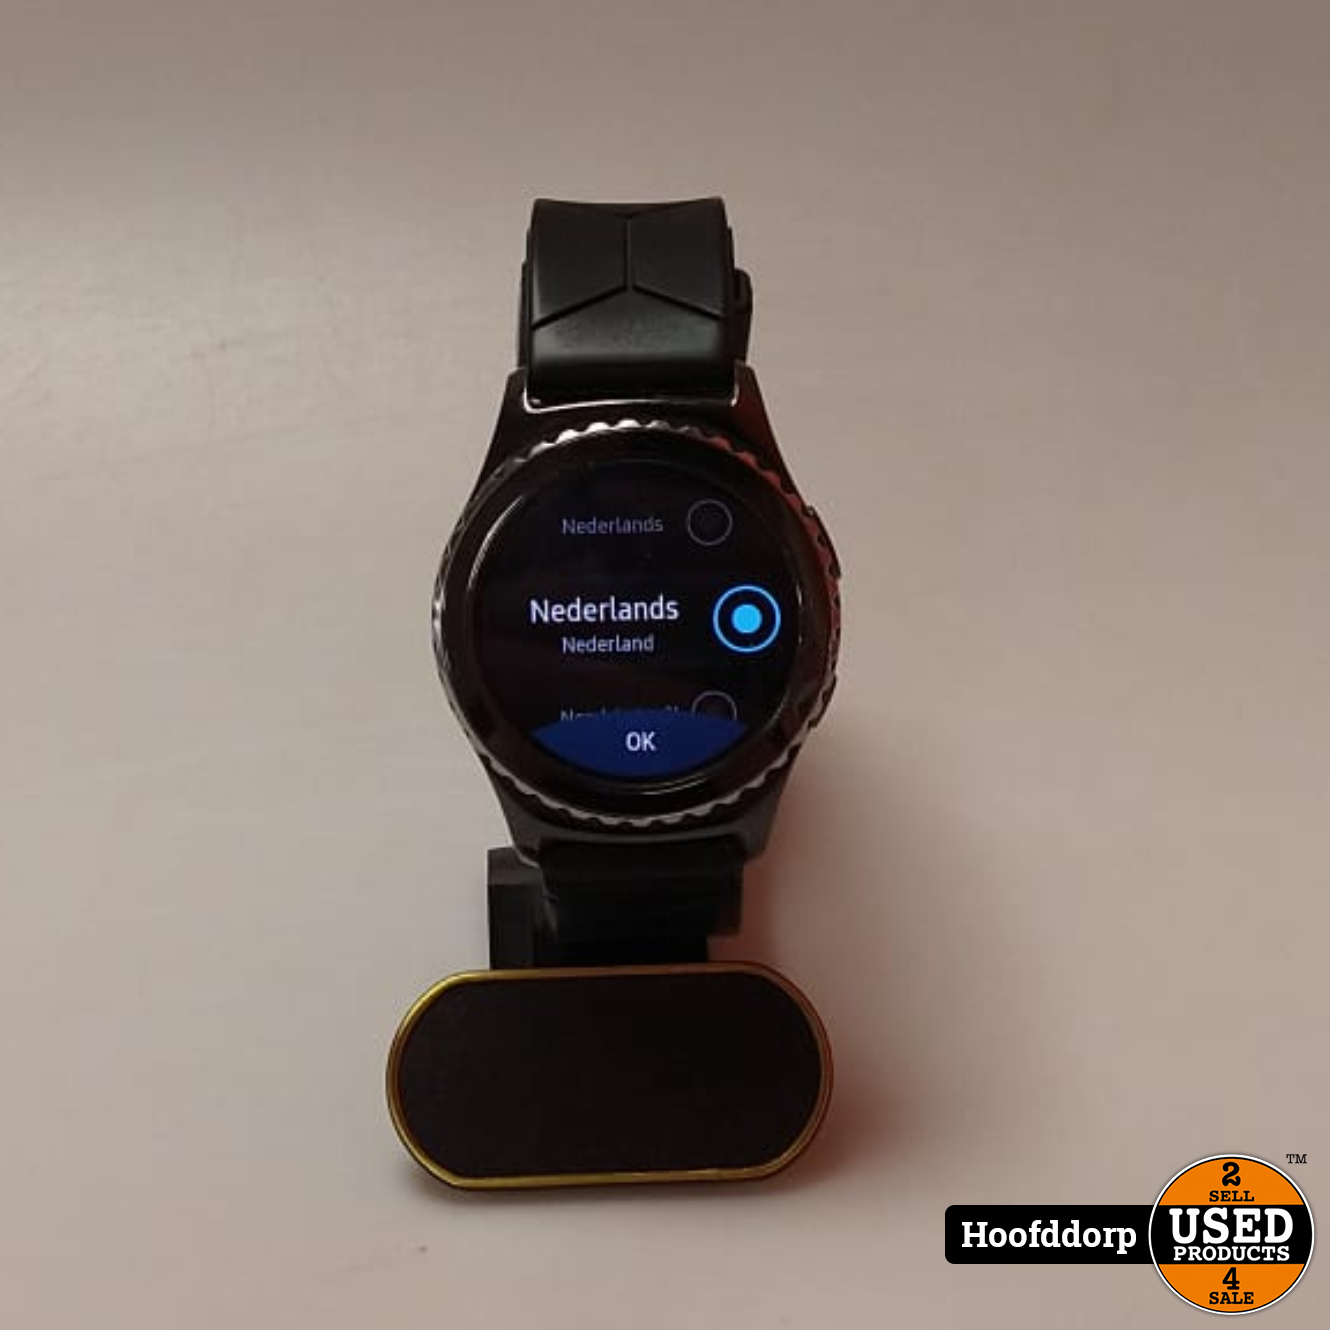 hoofdstuk Leia excelleren Samsung Galaxy Gear S2 Balr edition - Used Products Hoofddorp